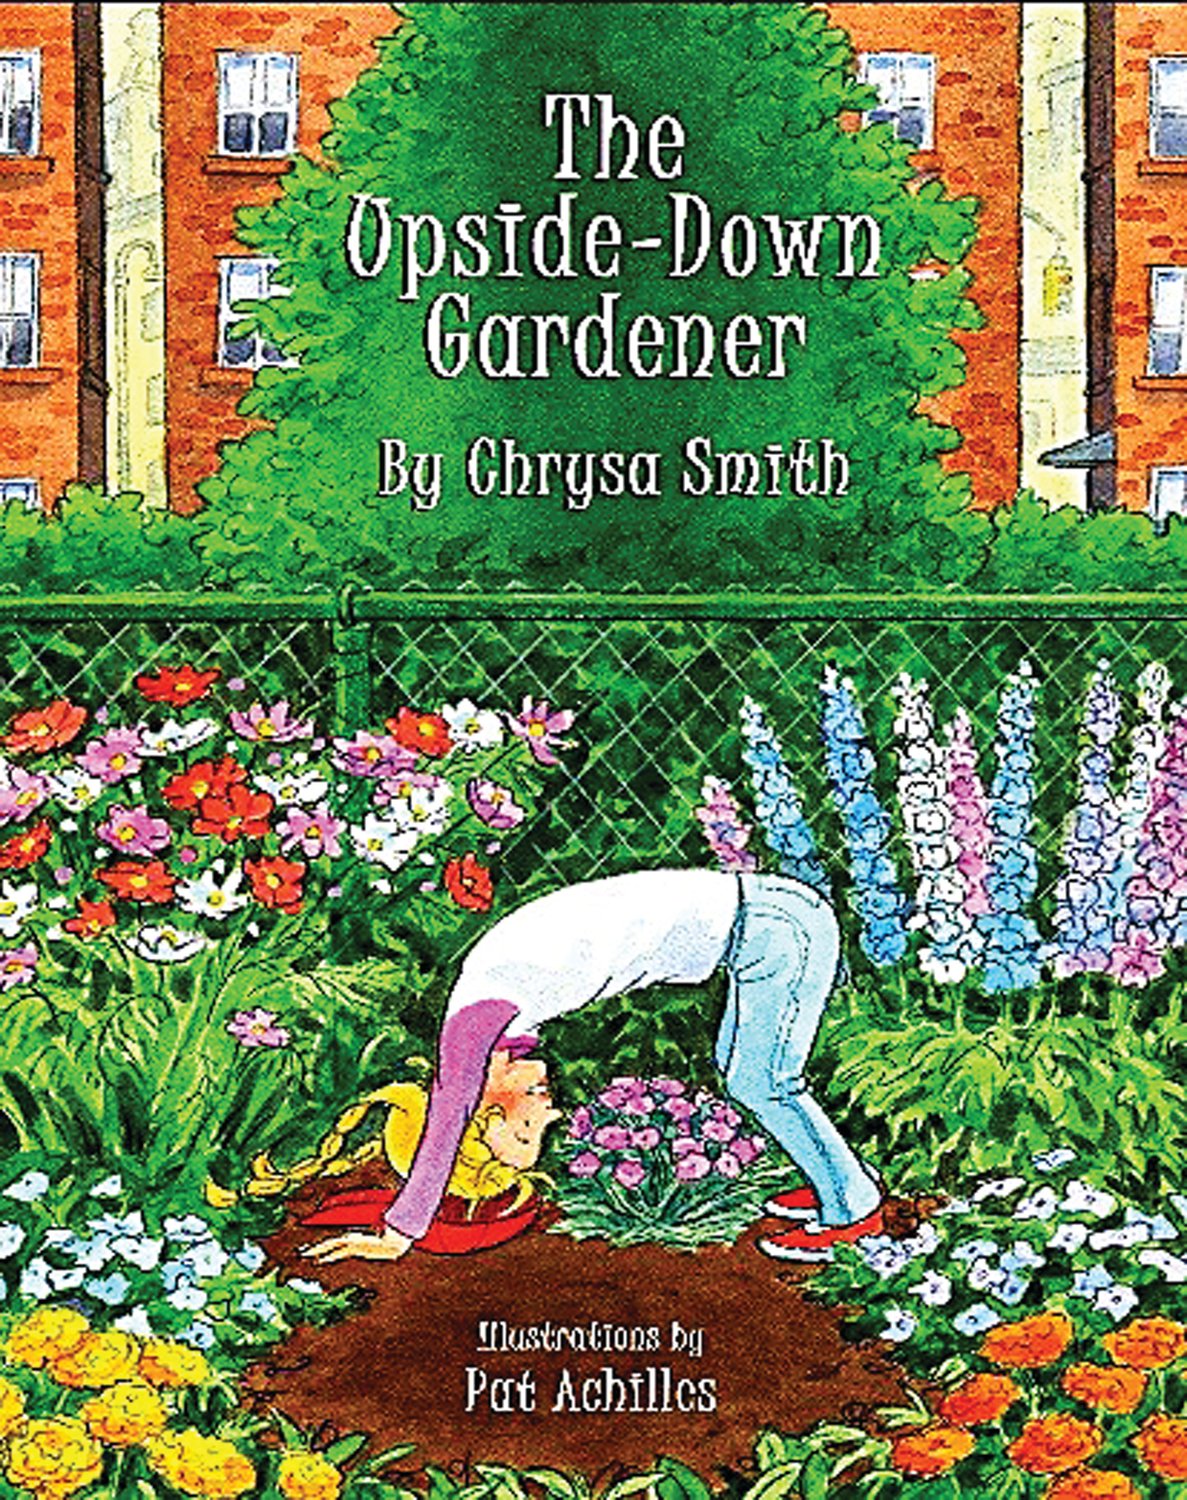 The cover of “The Upside-Down Gardener” by Chrysa Smith.